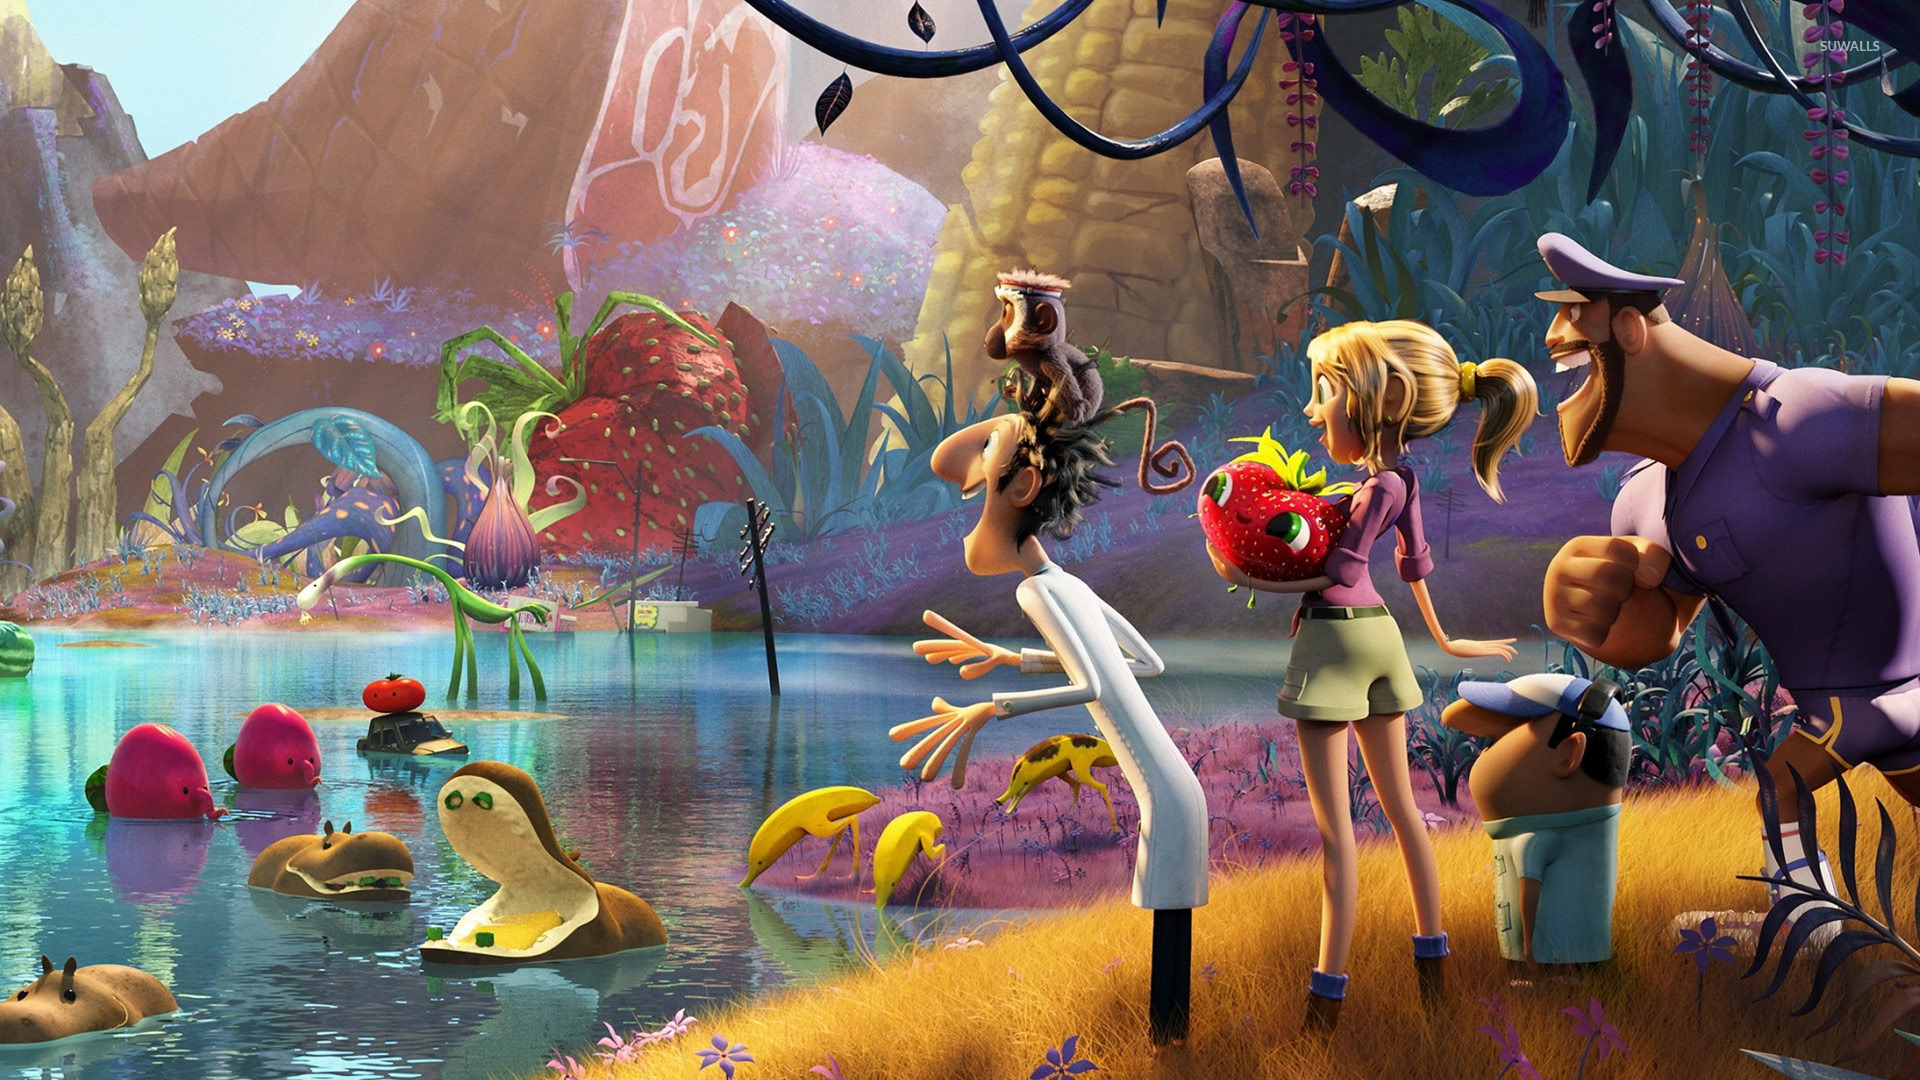 Cloudy with a Chance of Meatballs 2 jpg 1920x1080. 